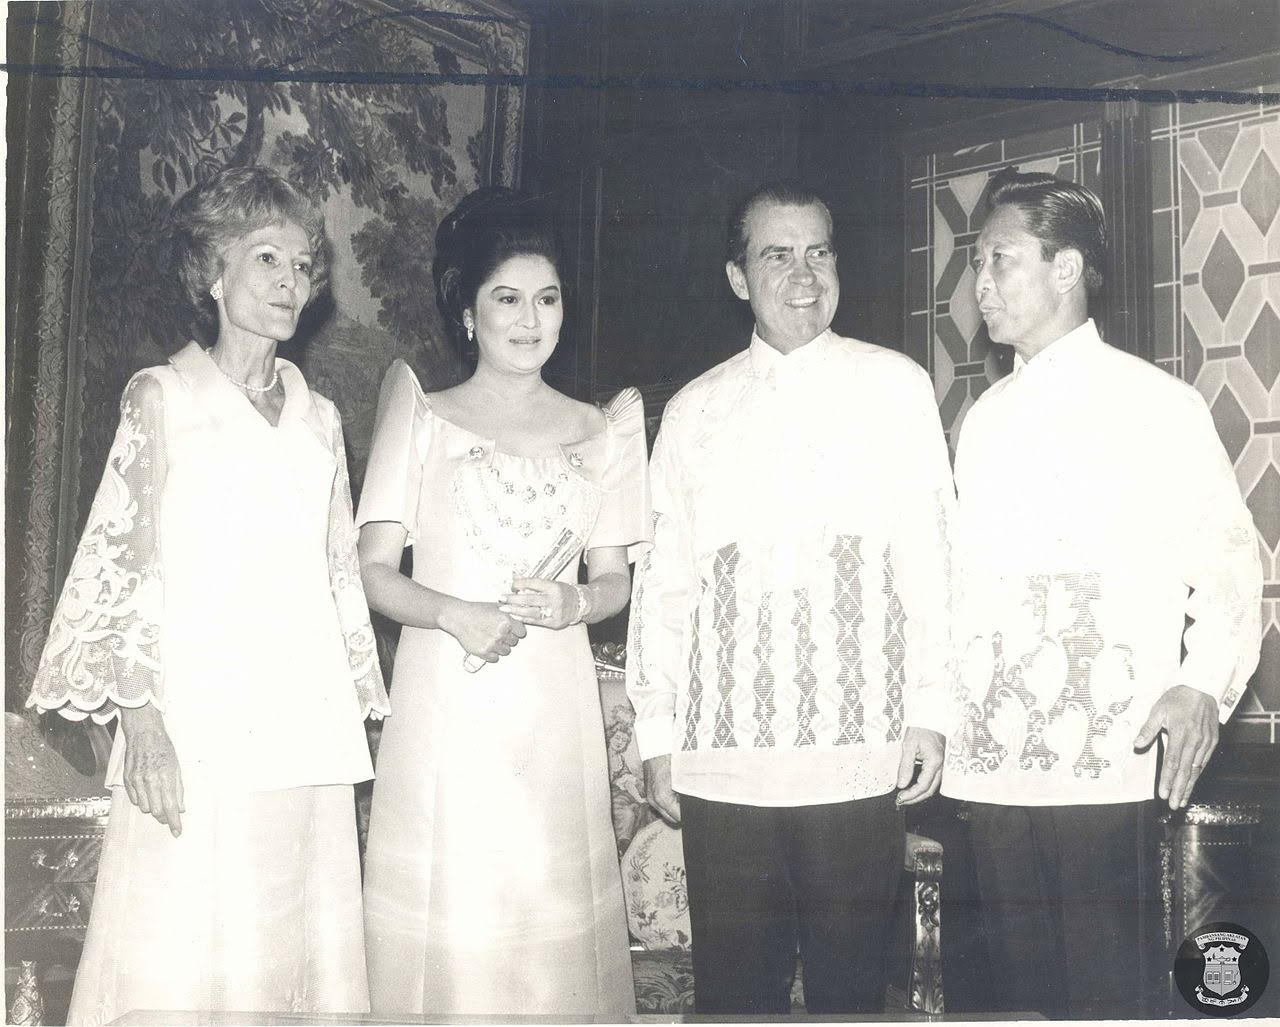 Black-and-white photograph of Richard and Pat Nixon and Ferdinand and Imelda Marcos, the men wearing traditional Filipino dress shirts and the women wearing traditional Filipino formal gowns.